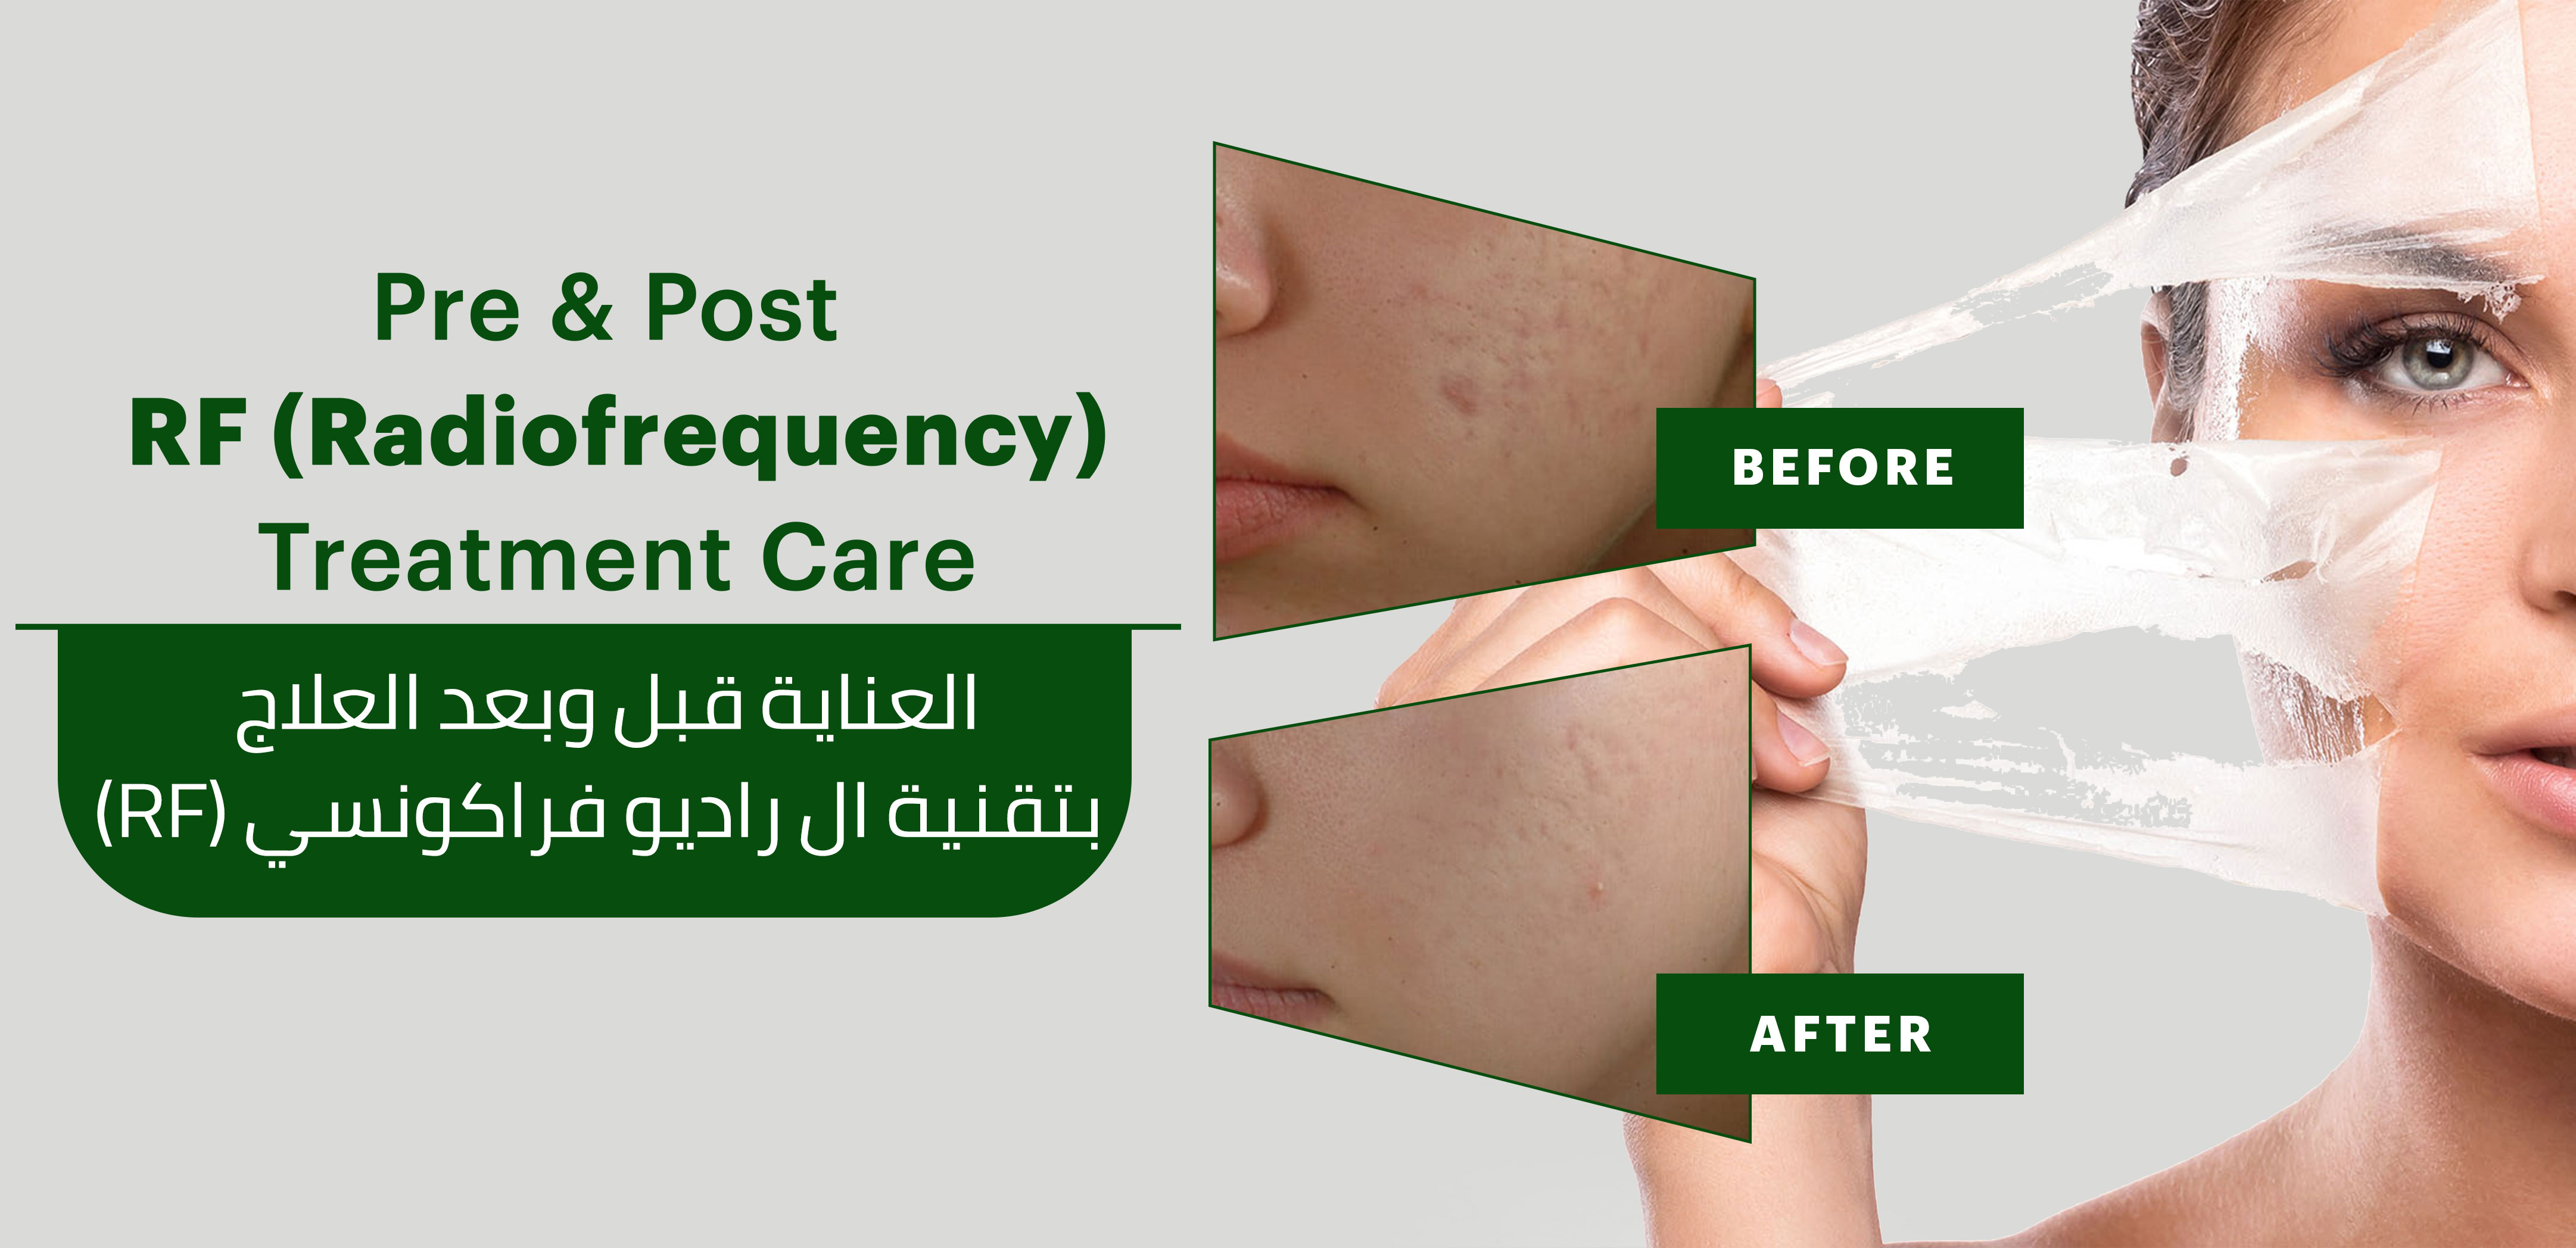 PRE & POST RF RADIOFREQUENCY